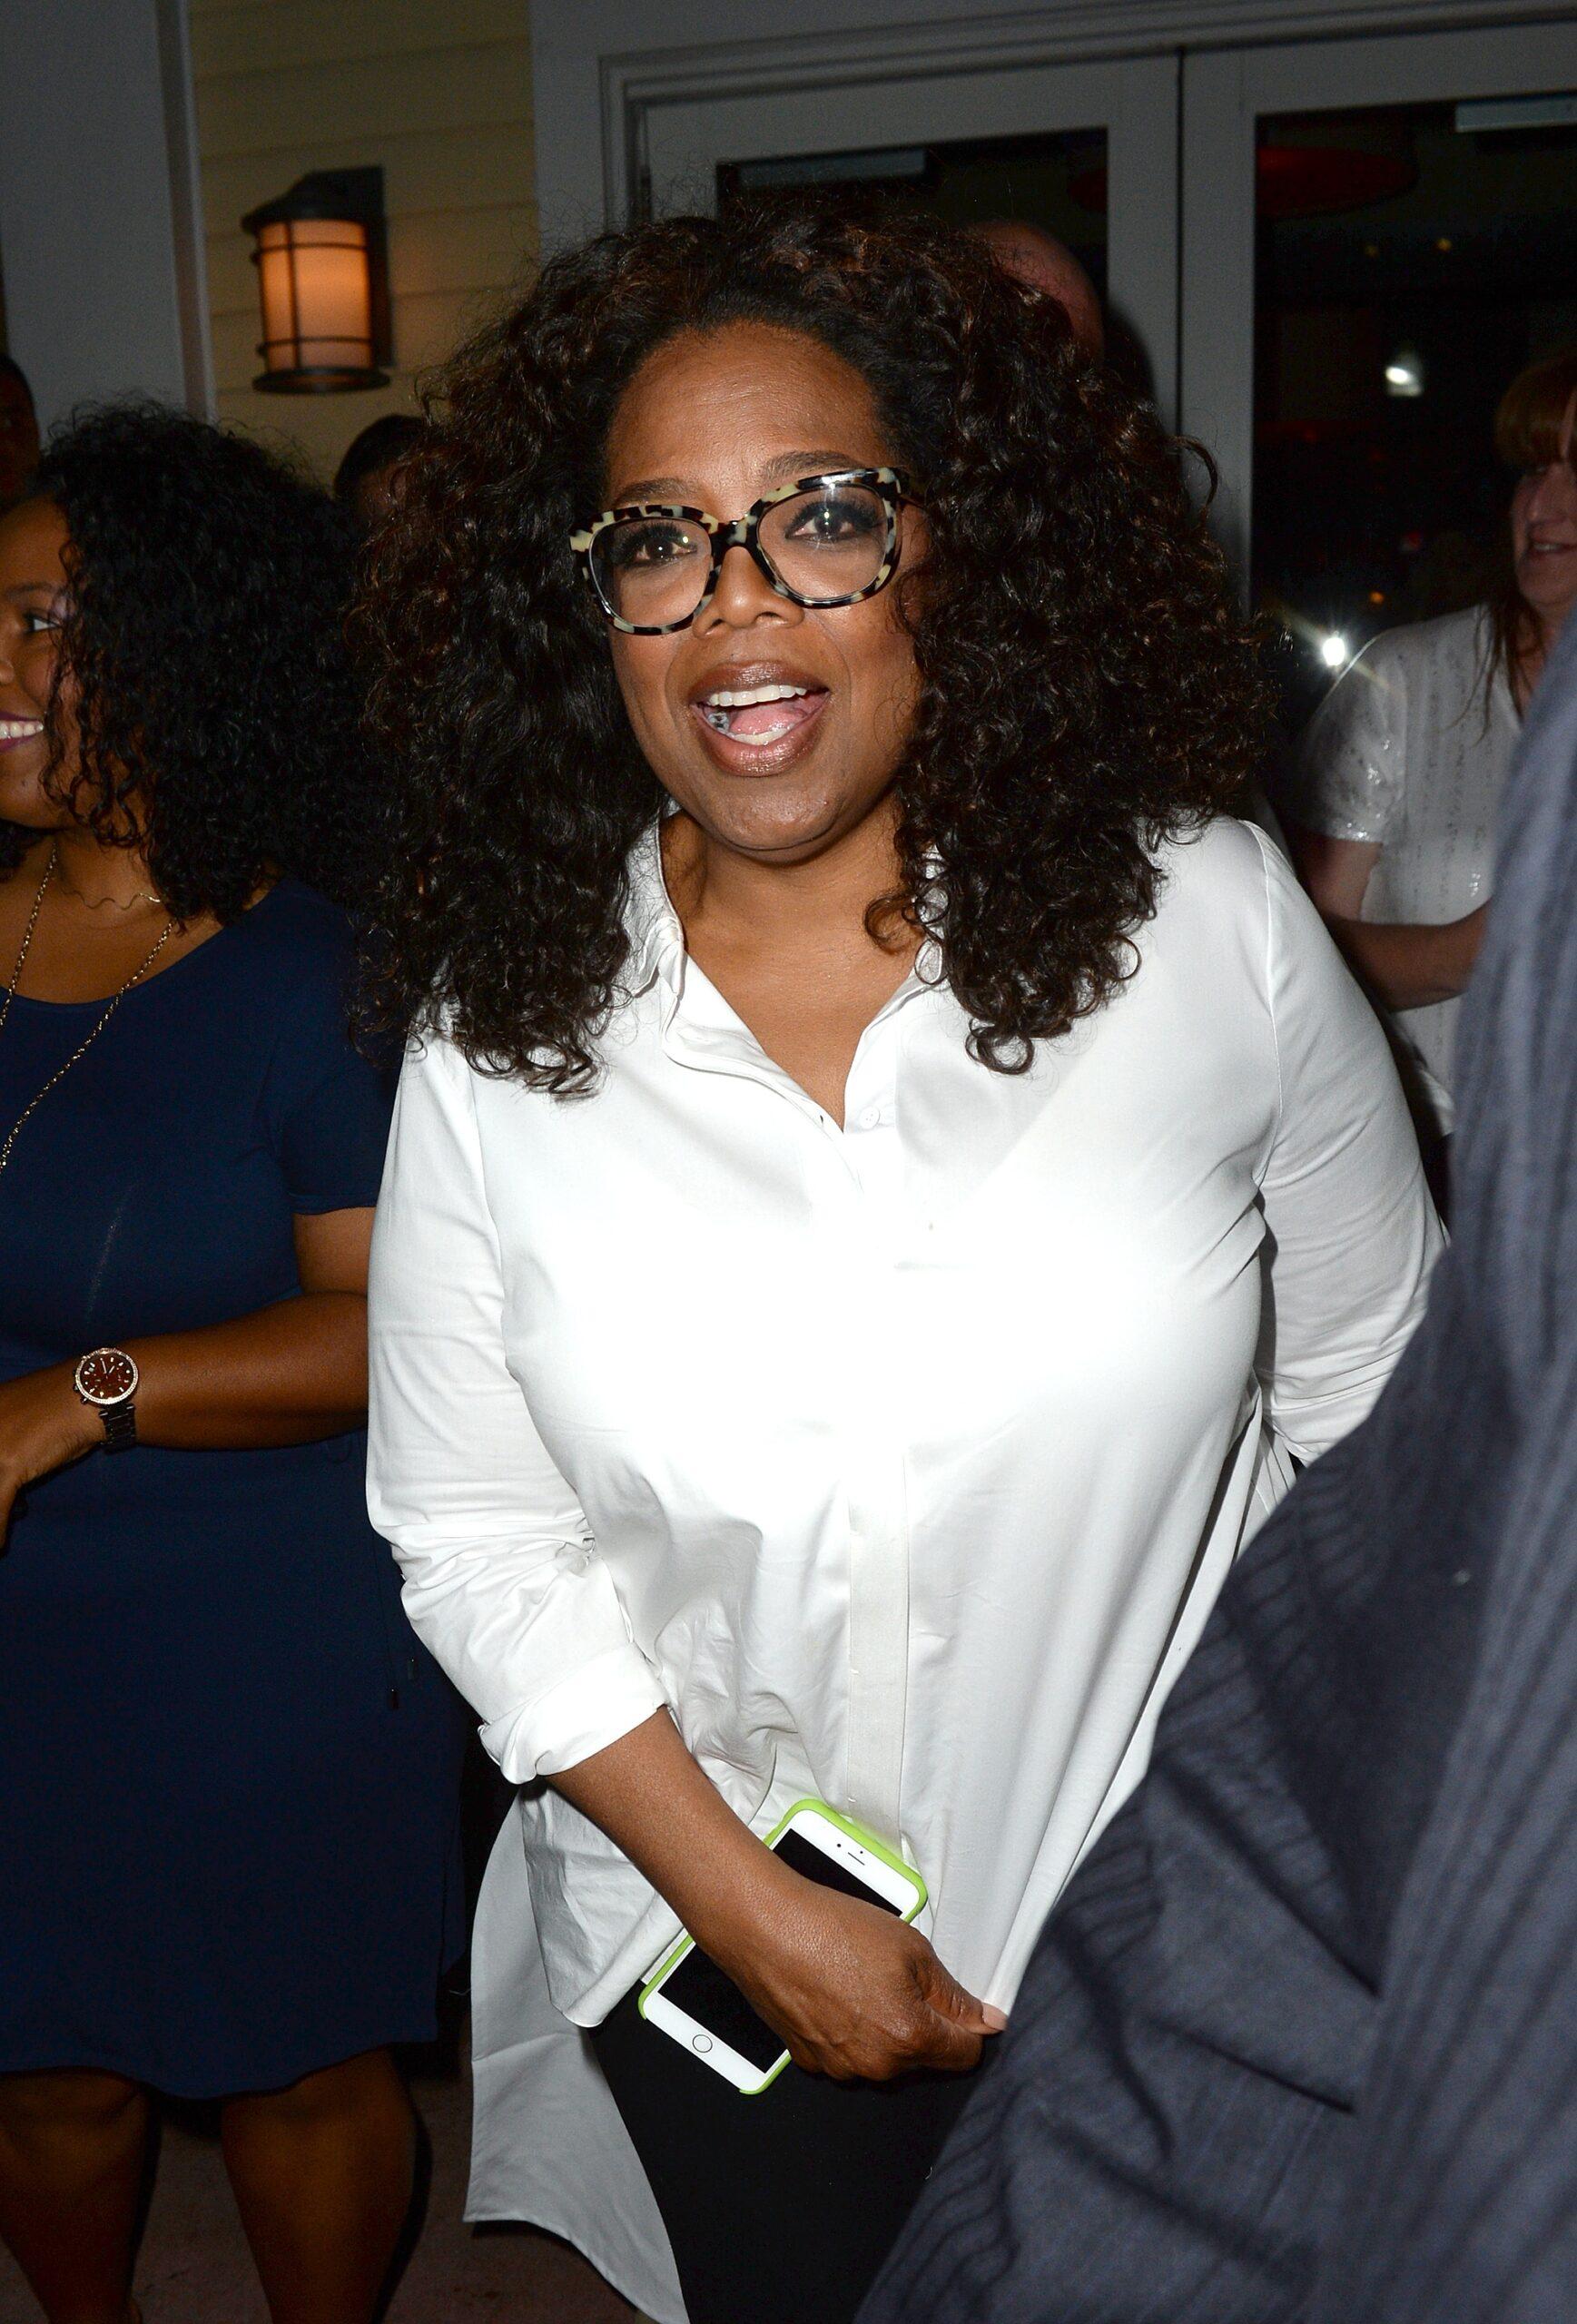 Oprah Winfrey and best friend Gayle King are seen leaving Prime 112 restaurant after finishing Oprah apos s The Life You Want Weekend at American Airlines Arena in Miami Beach